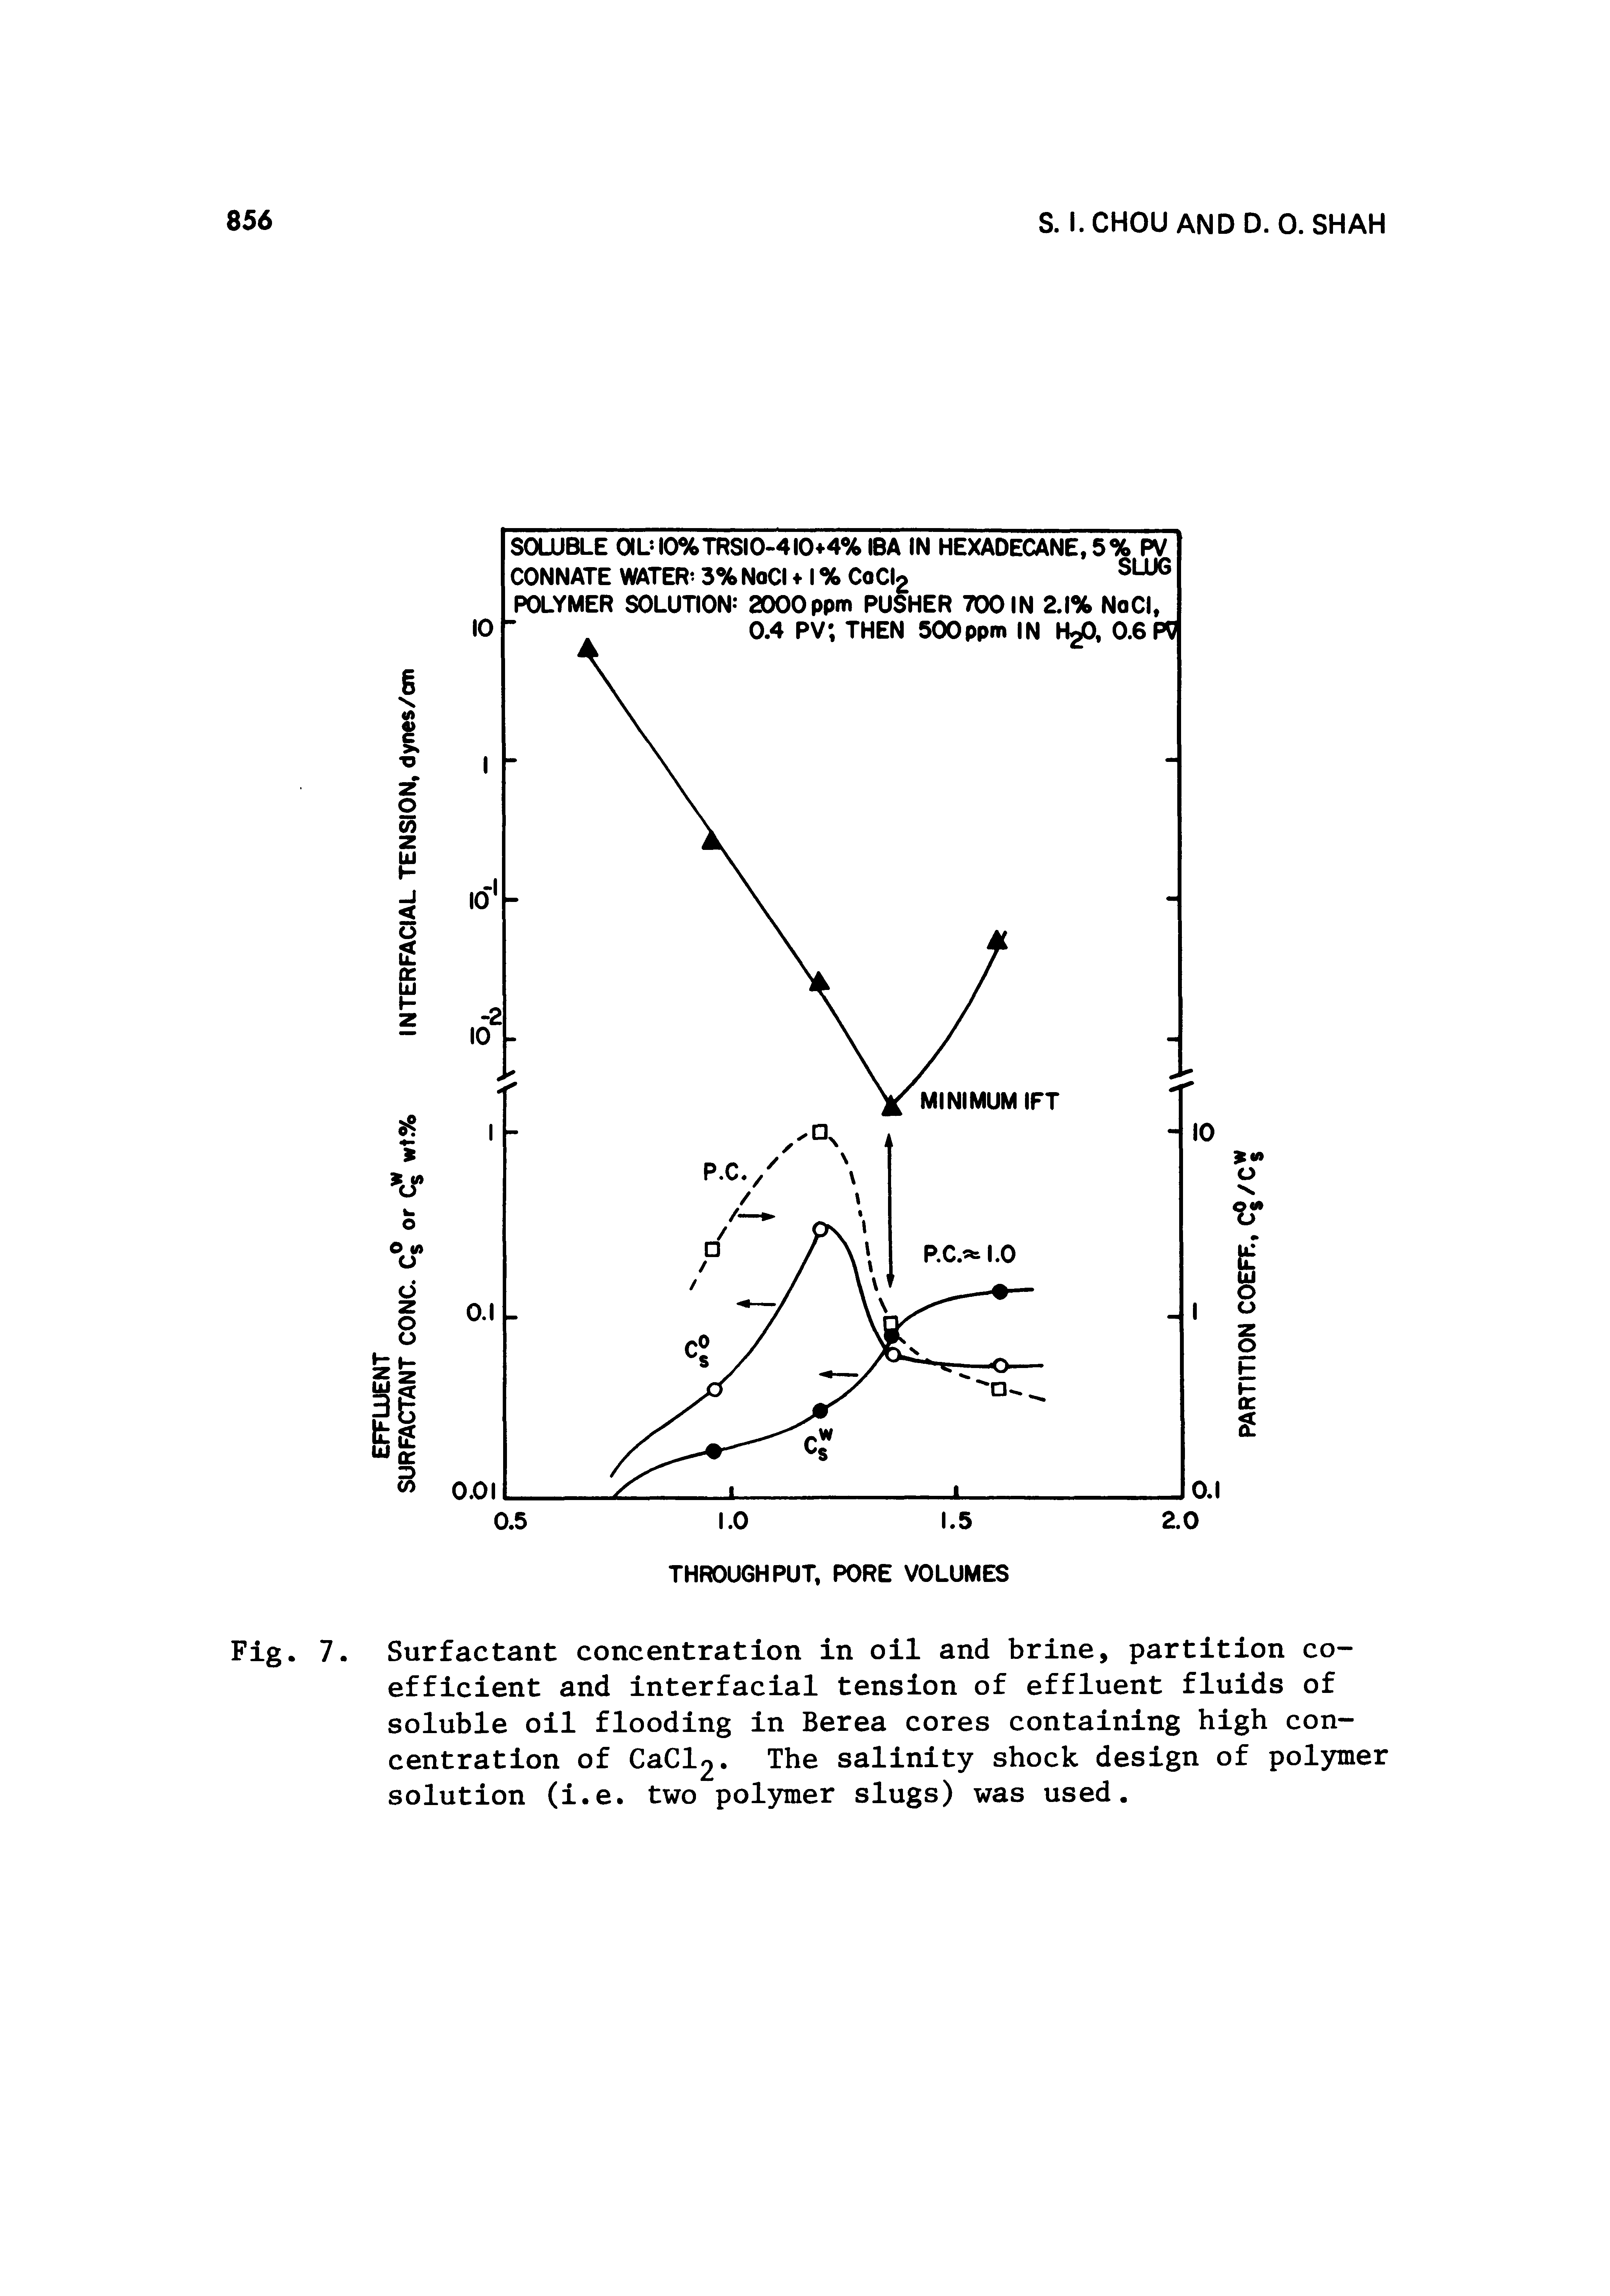 Fig. 7. Surfactant concentration in oil and brine, partition coefficient and interfacial tension of effluent fluids of soluble oil flooding in Berea cores containing high concentration of CaCl2. The salinity shock design of polymer solution (i.e. two pol3rmer slugs) was used.